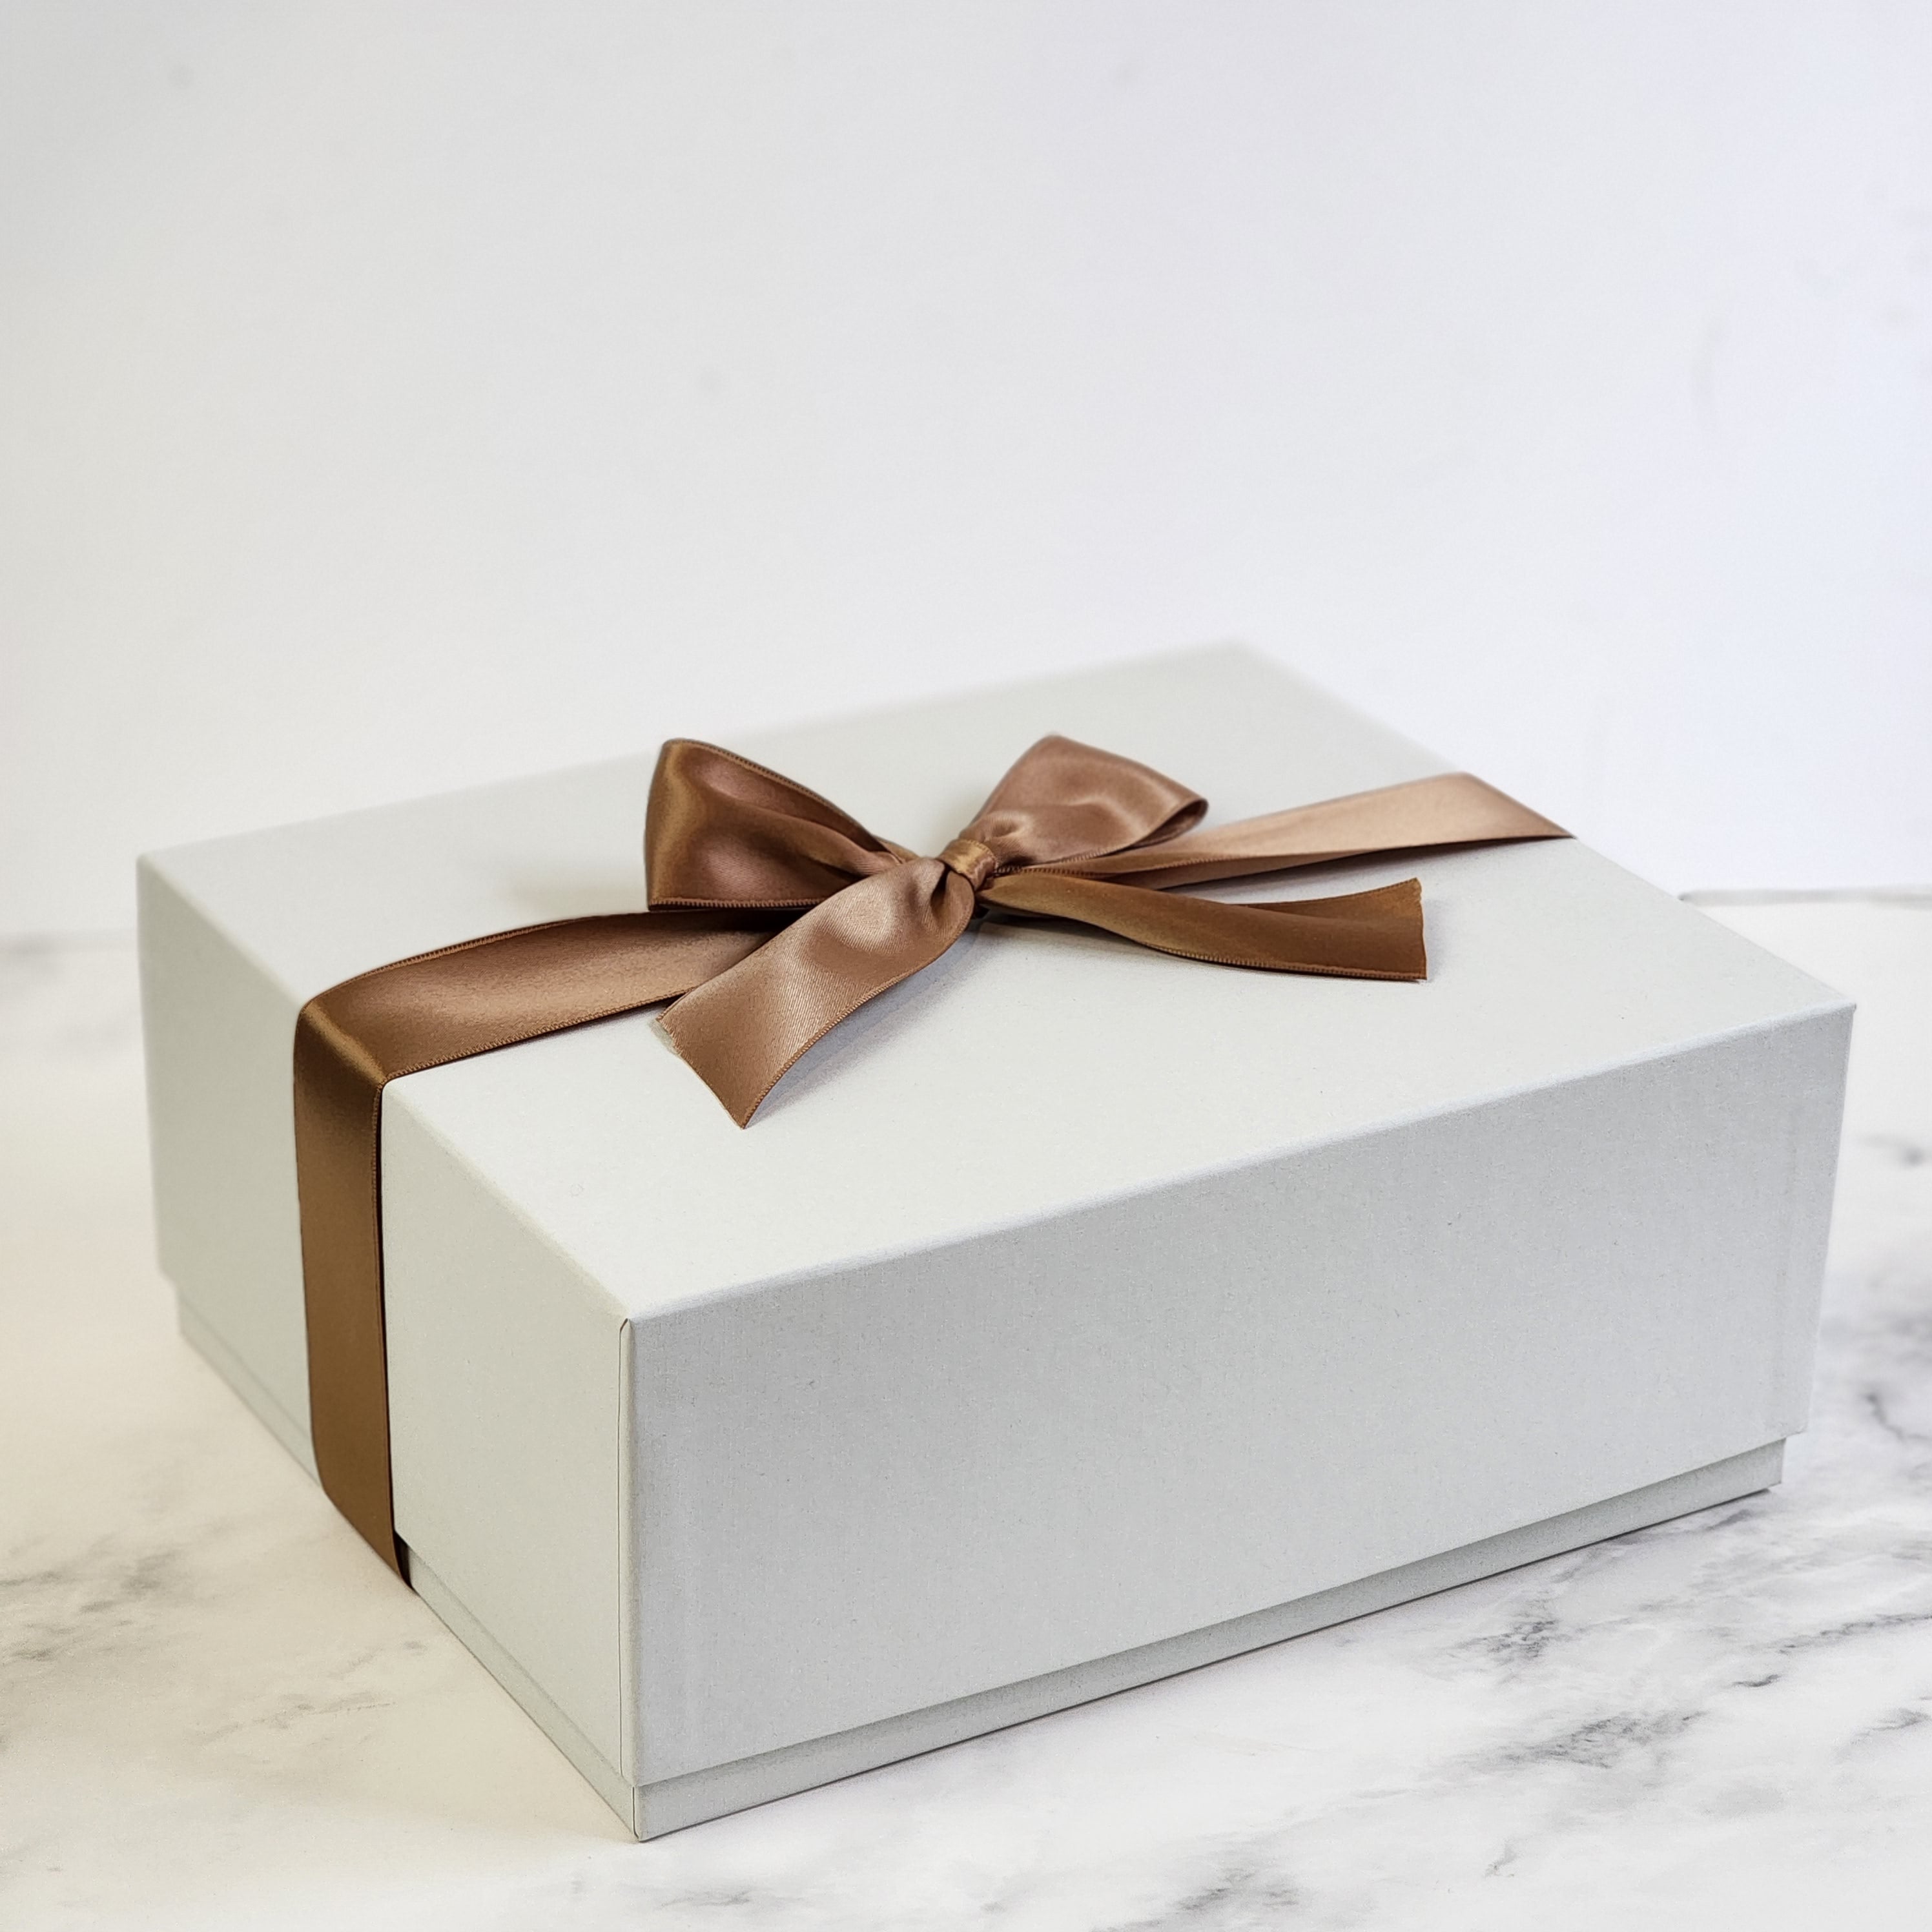 Luxury Curated Gift Boxes For Women